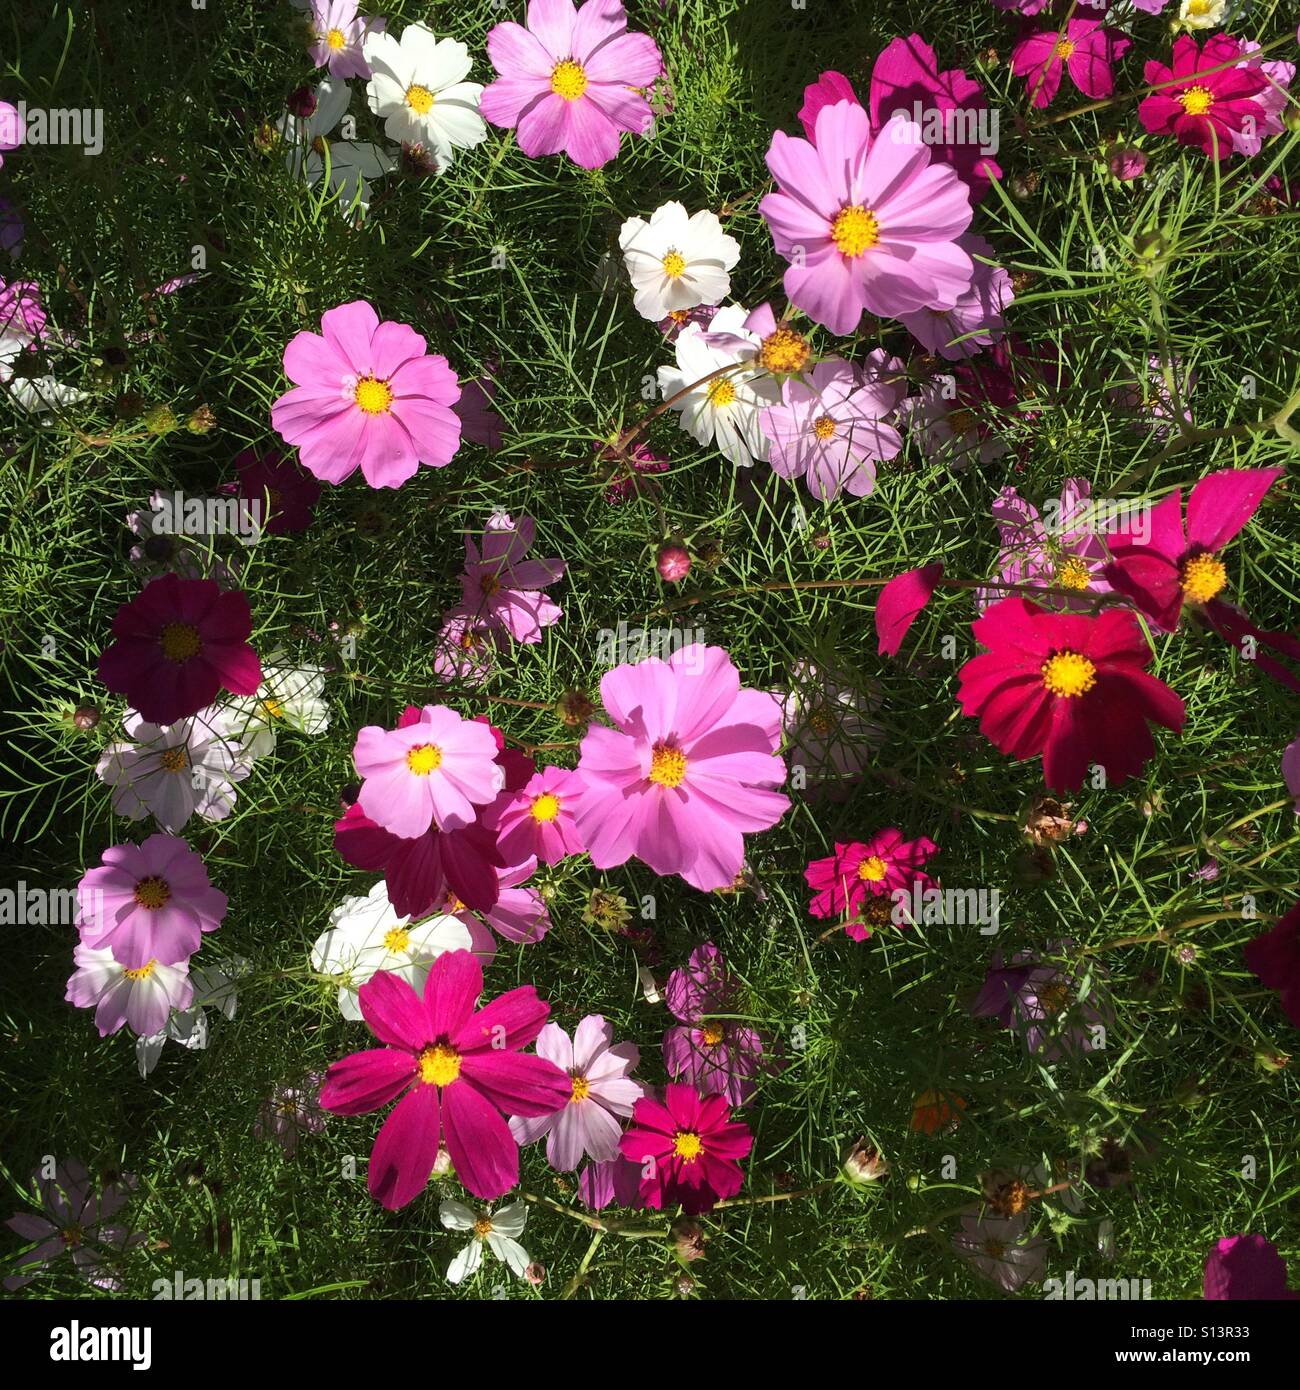 Flowers catch the light of the morning sun. The flowers are Cosmos. Stock Photo